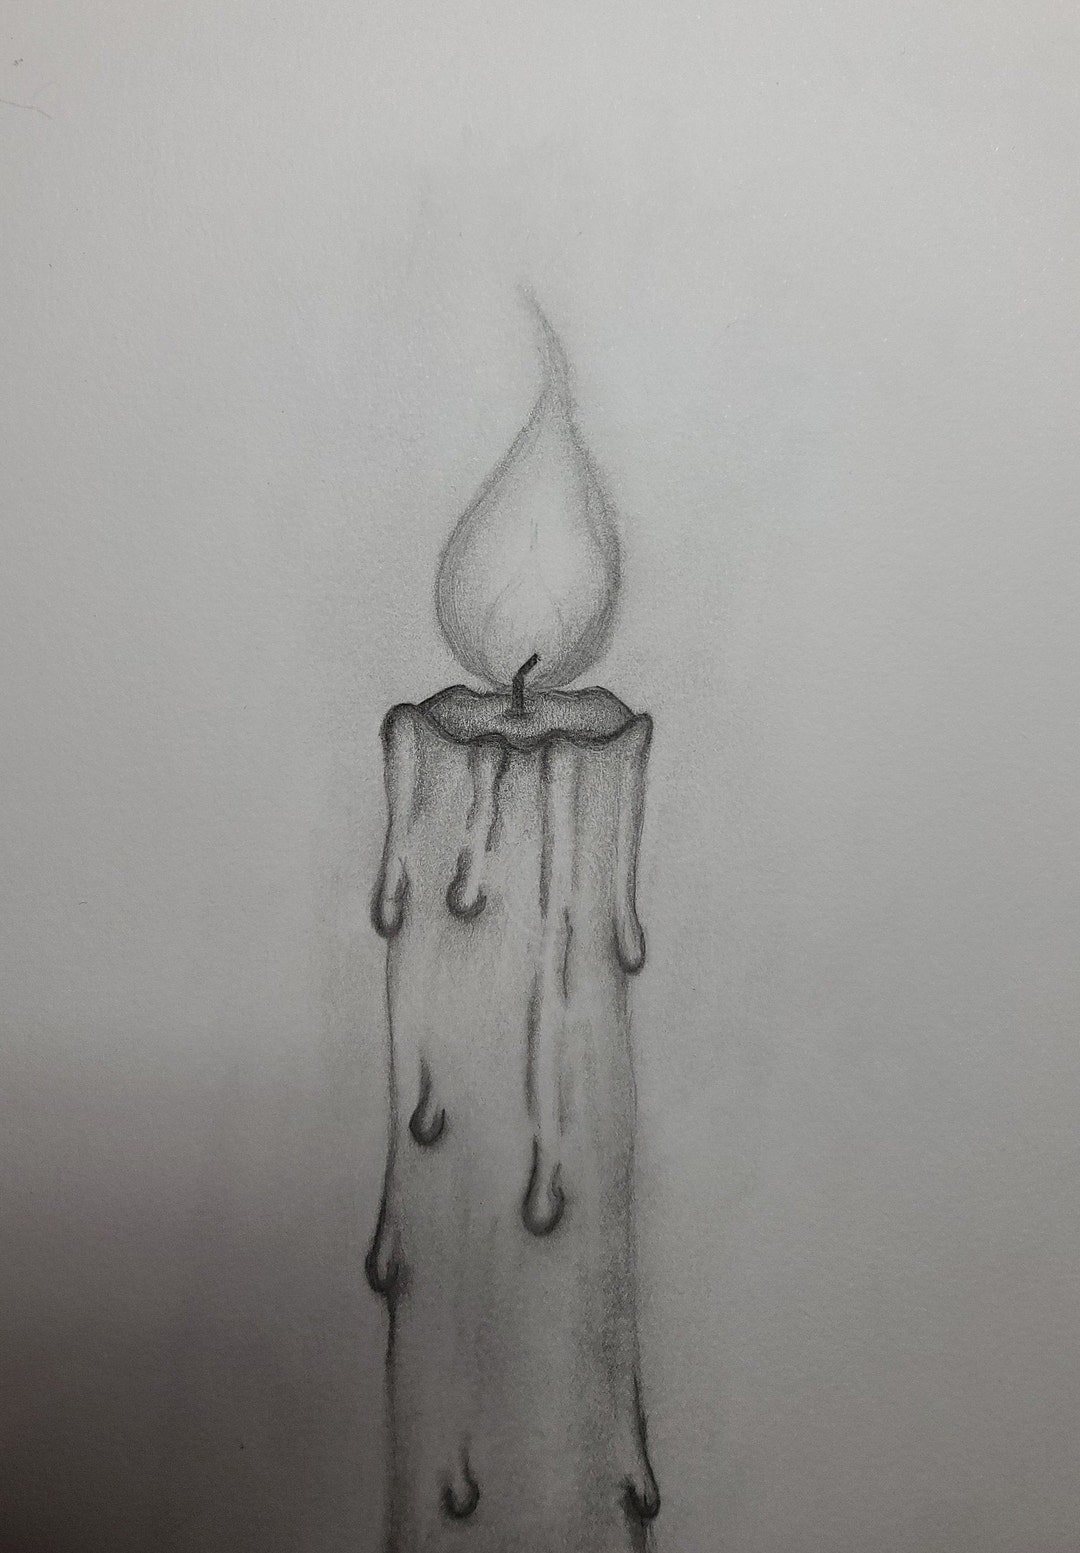 Candle pencil drawing by mantronica on DeviantArt